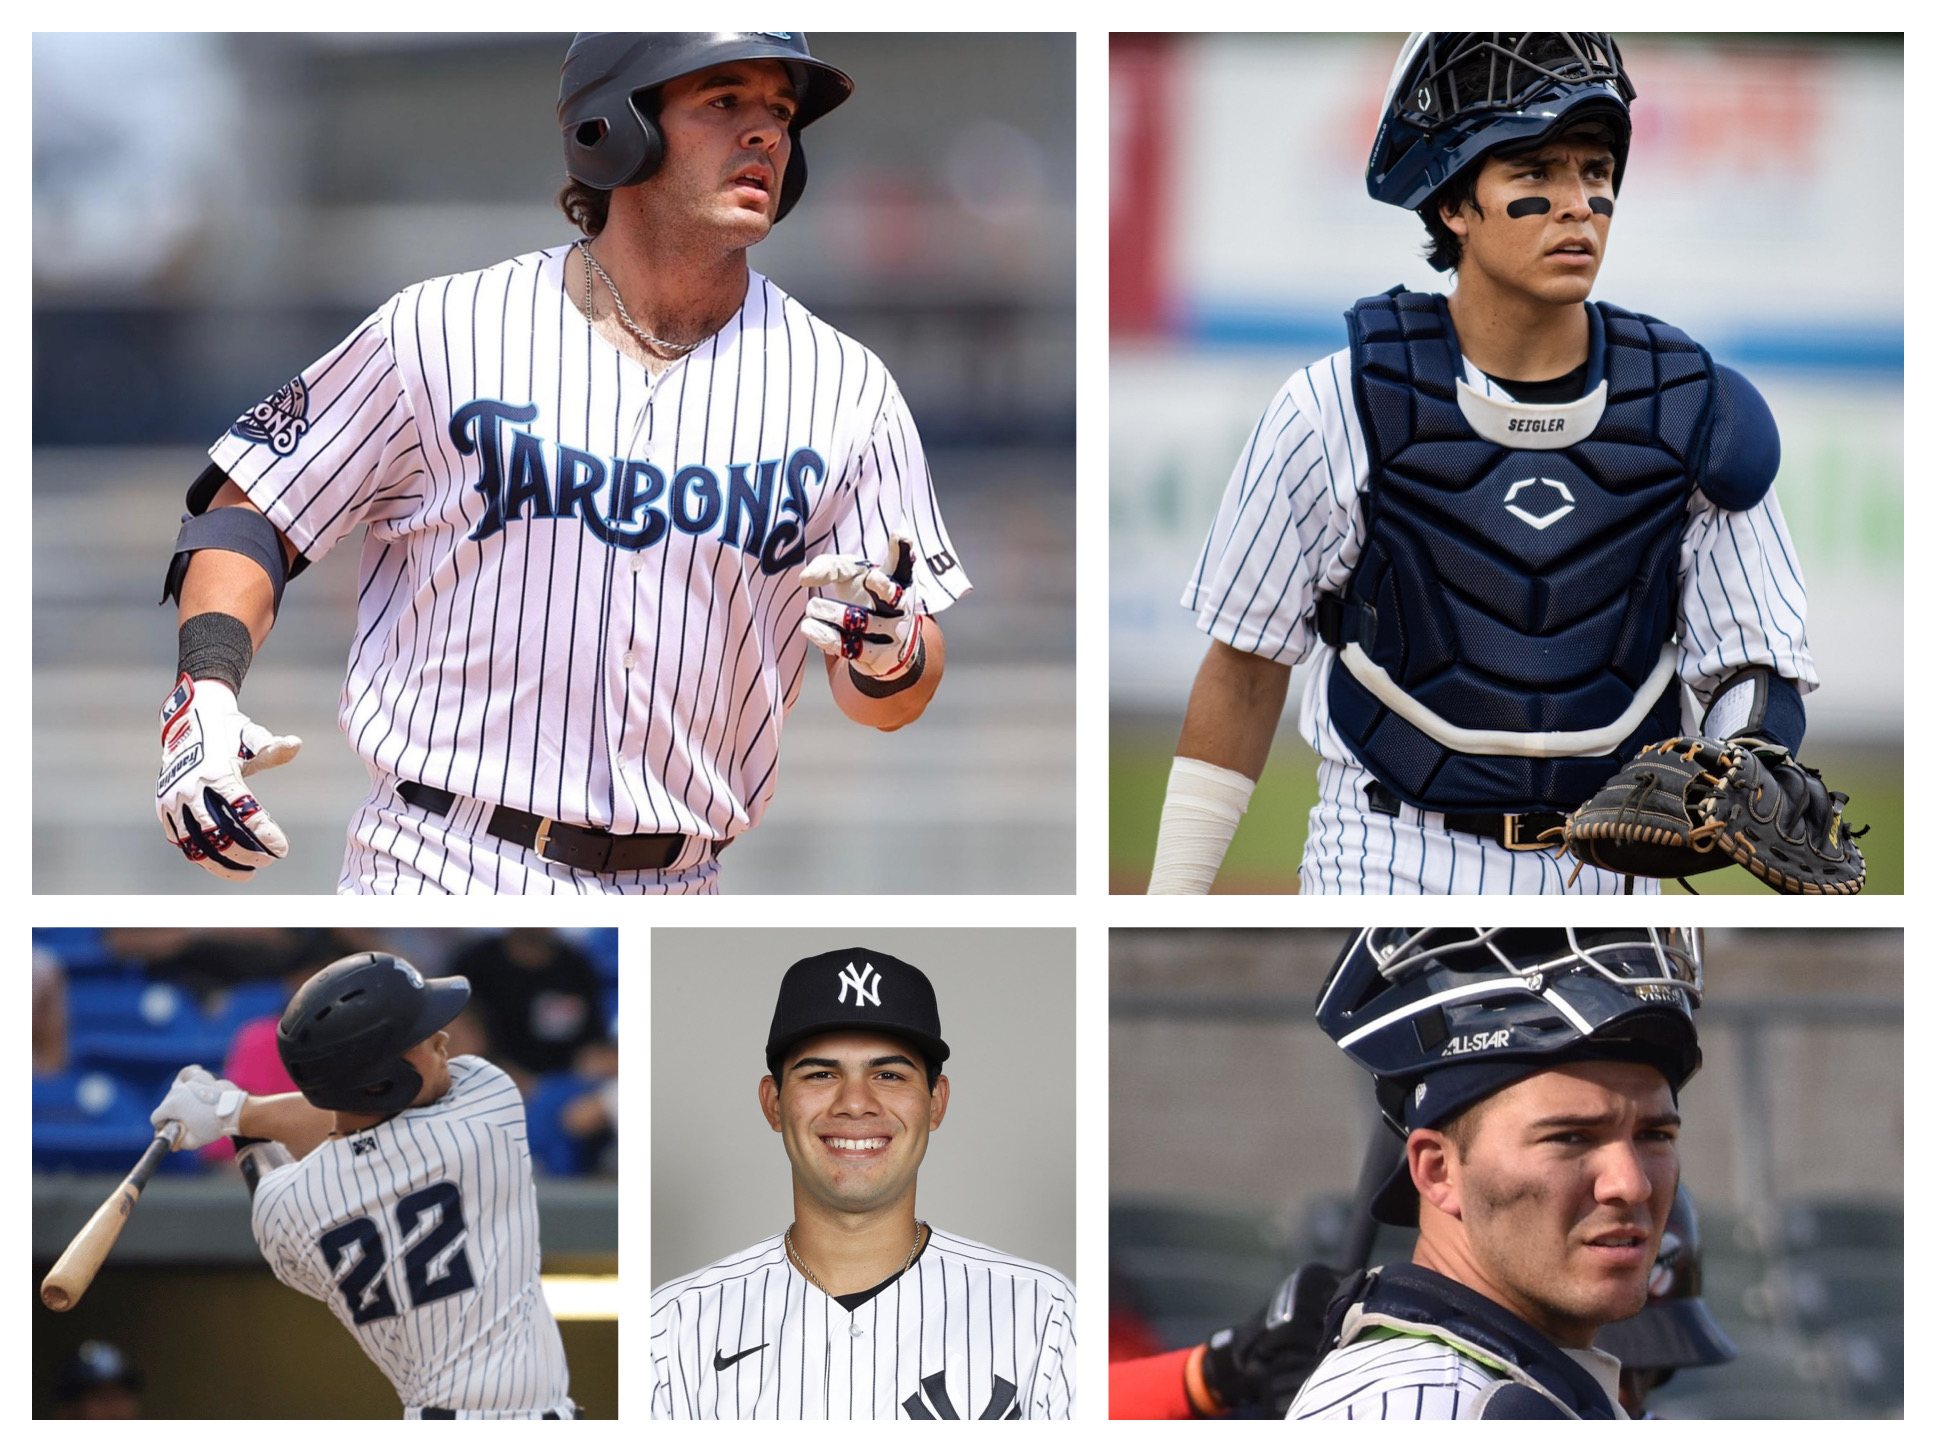 Ranking the best special jerseys worn by the Yankees minor league